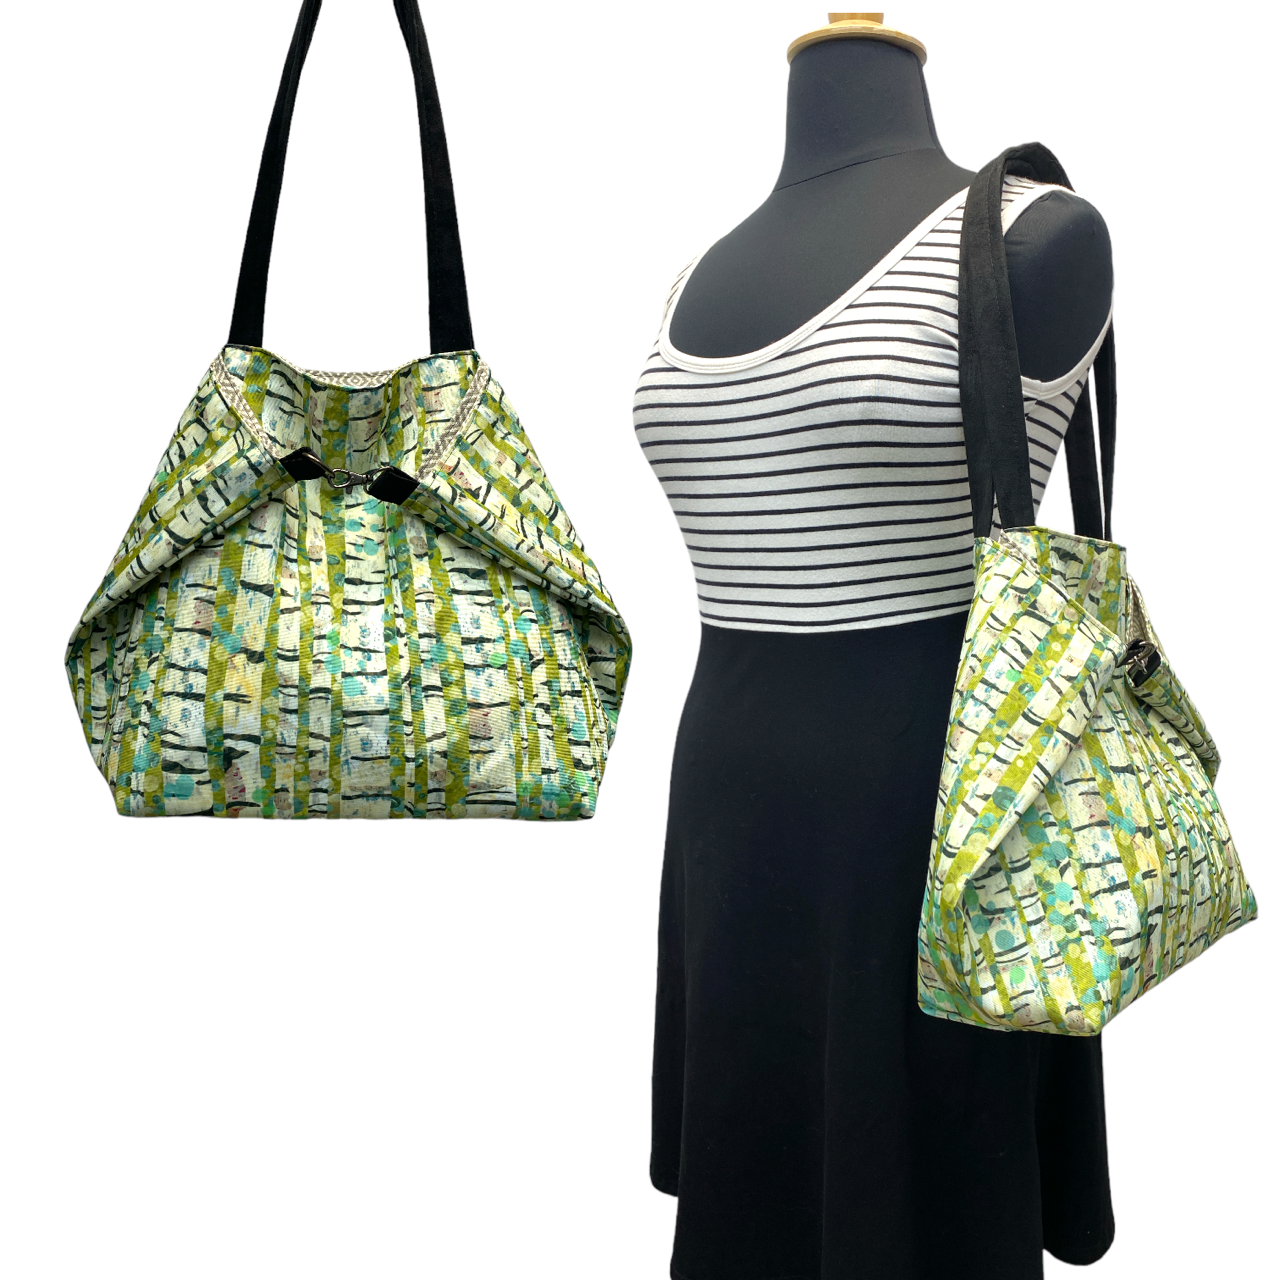 Simple Sack TOTE - Green Birch Trees